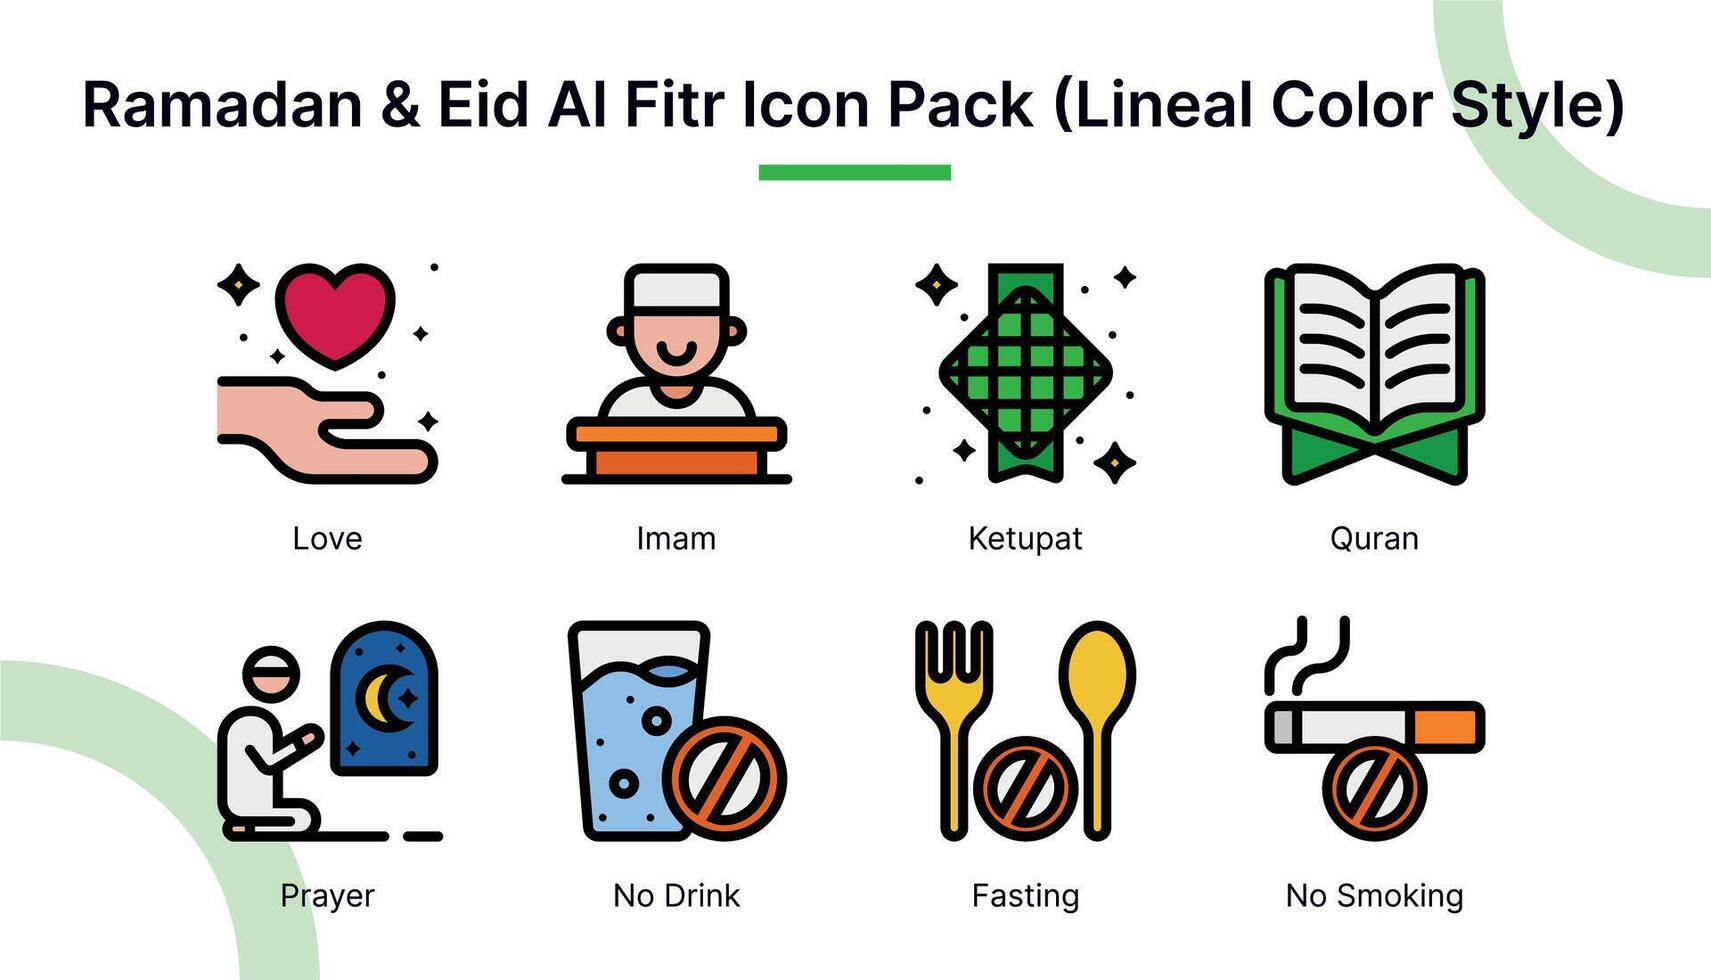 Ramadan and Eid Al Fitr  Icon Set in Lineal Color Style Suitable for web and app icons, presentations, posters, etc. vector